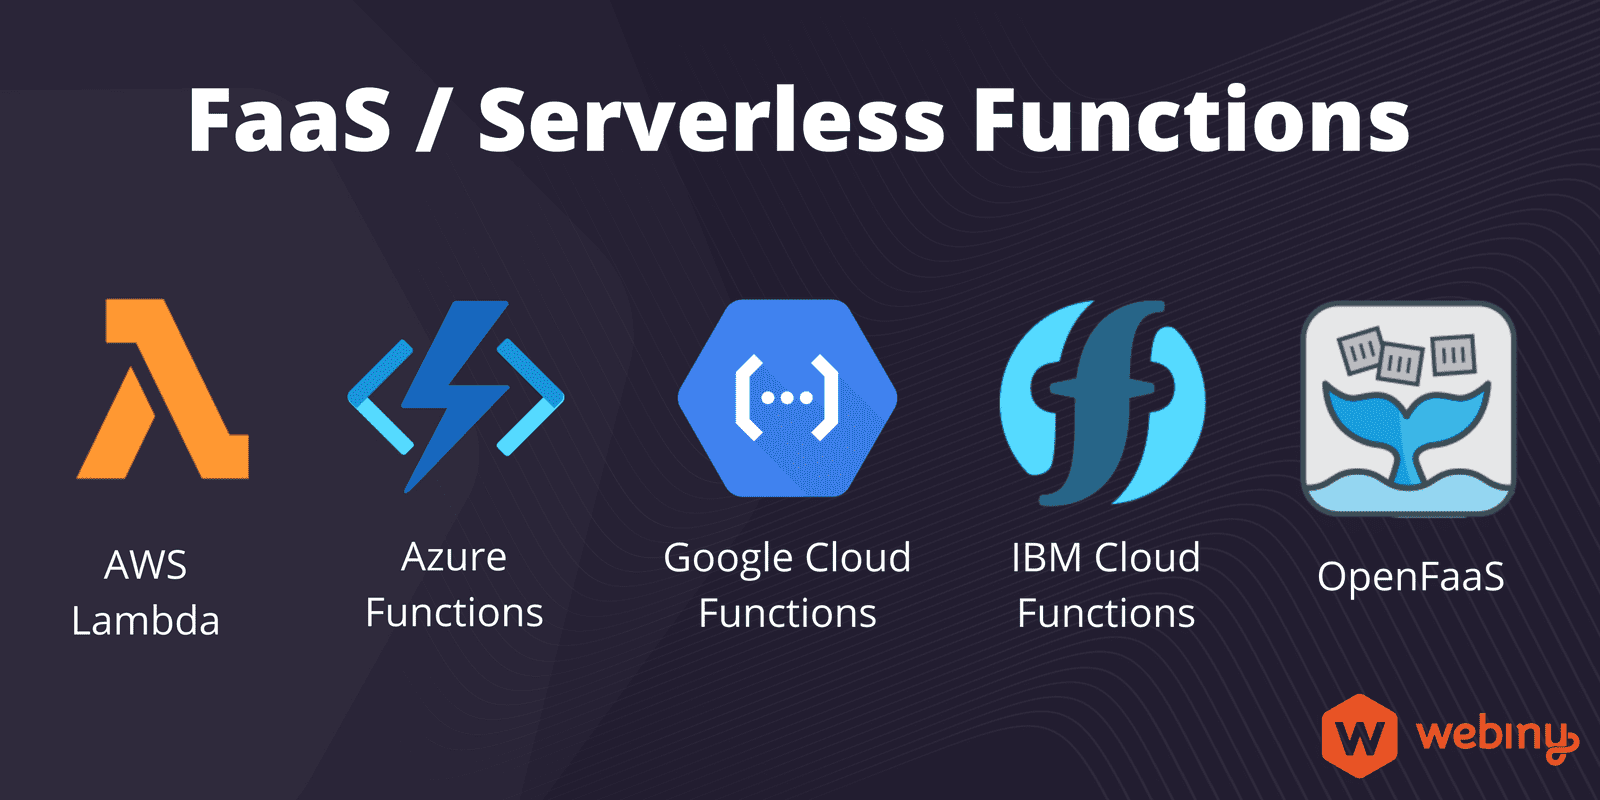 FaaS and Serverless Functions